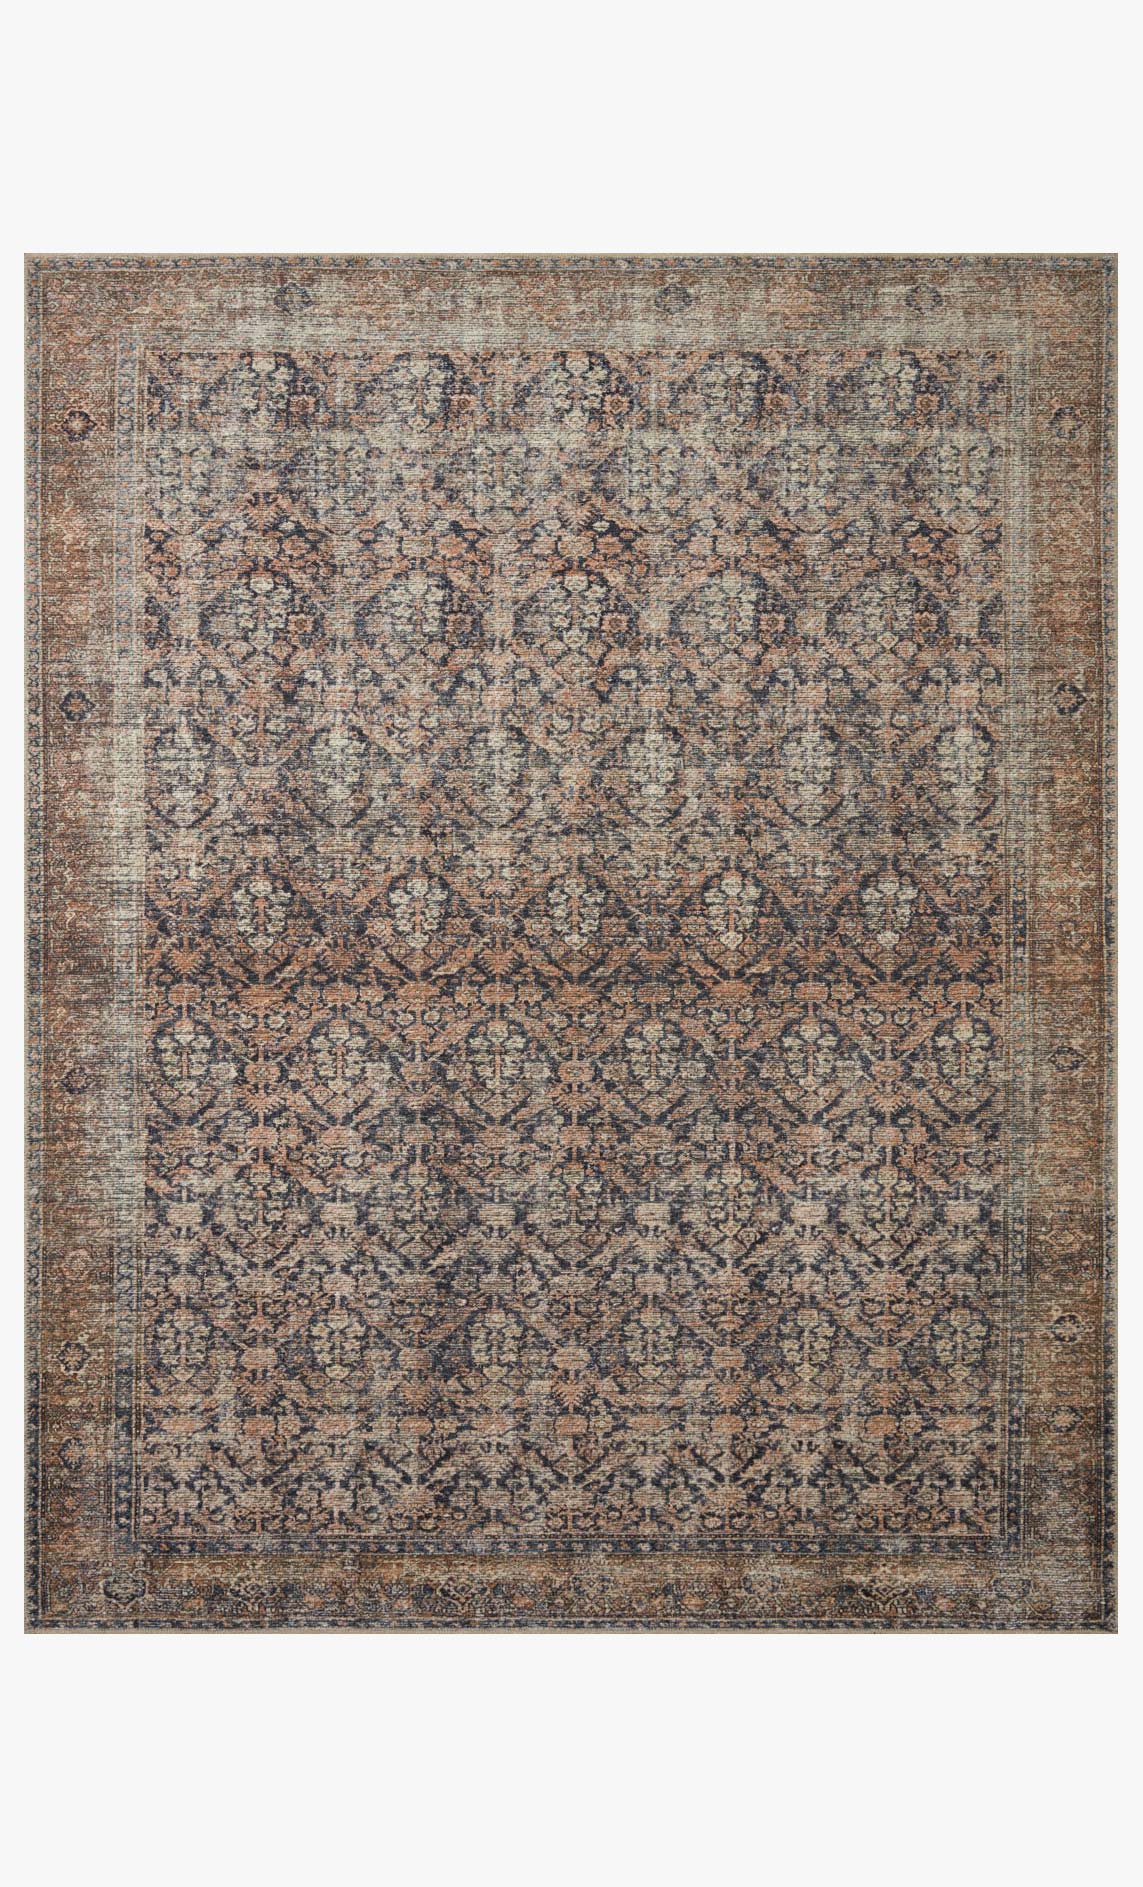 Billie Collection Rug by Amber Lewis × Loloi